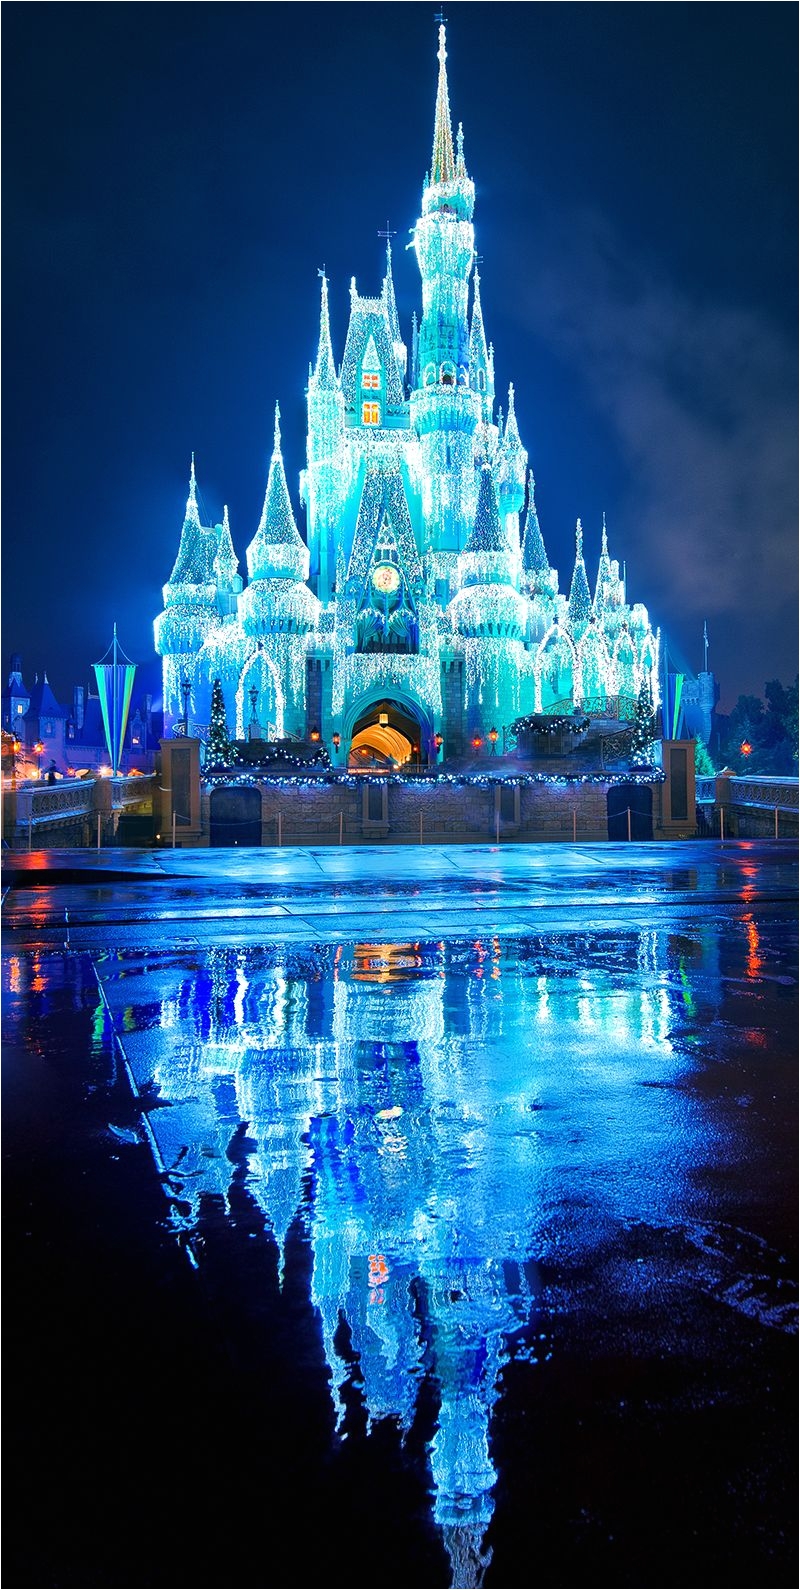 almost time for christmas heres what to know if youre visiting walt disney world this time of year